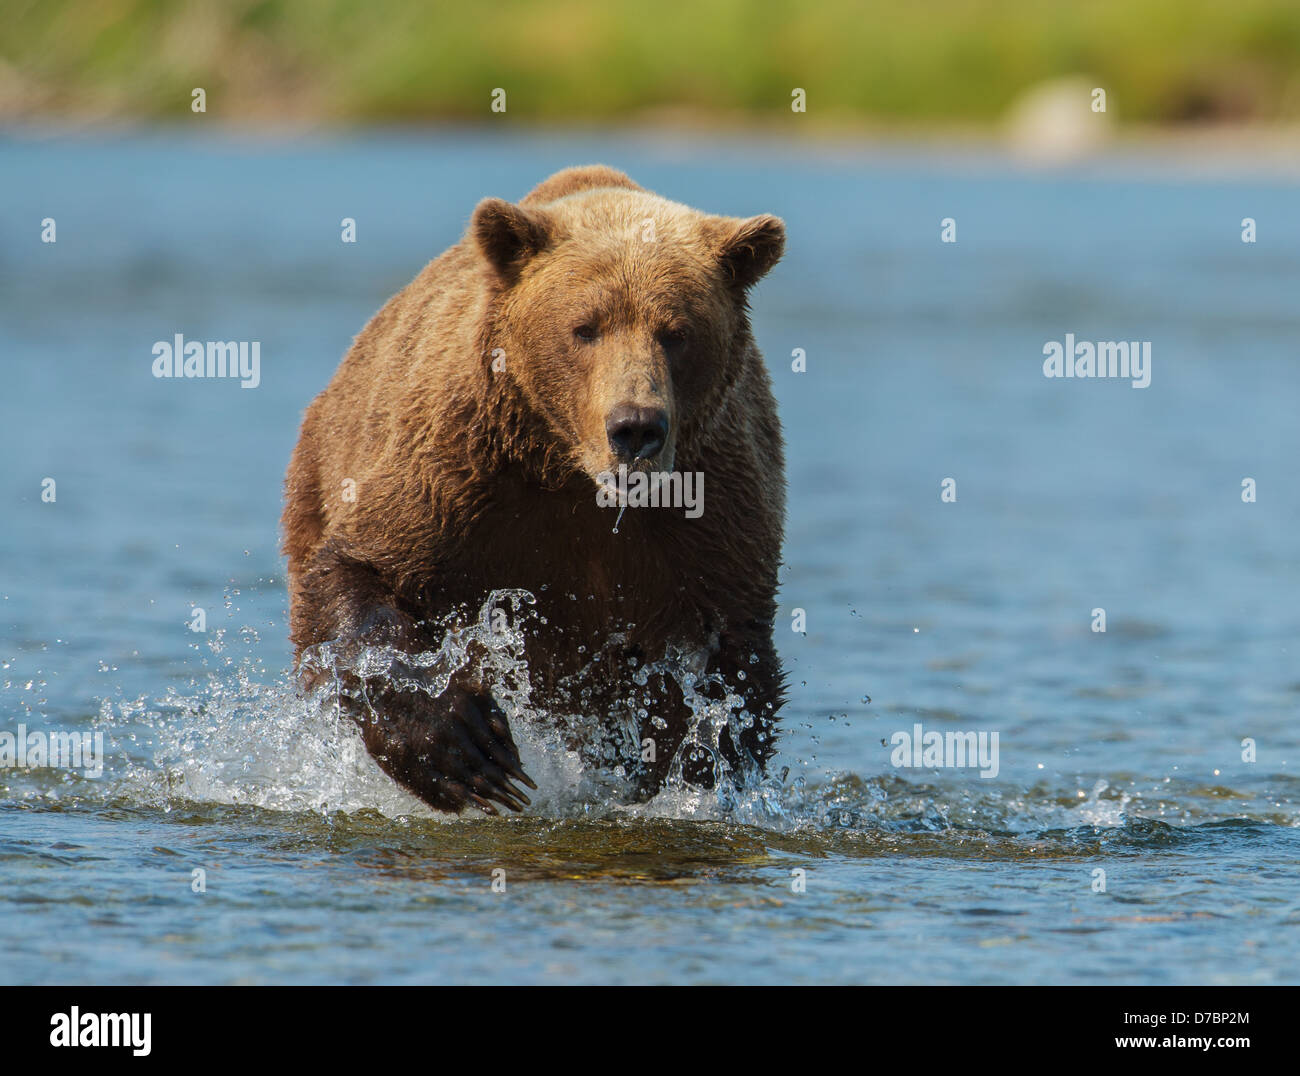 A brown bear (ursus arctos) running in the water fishing for salmon;Alaska united states of america Stock Photo